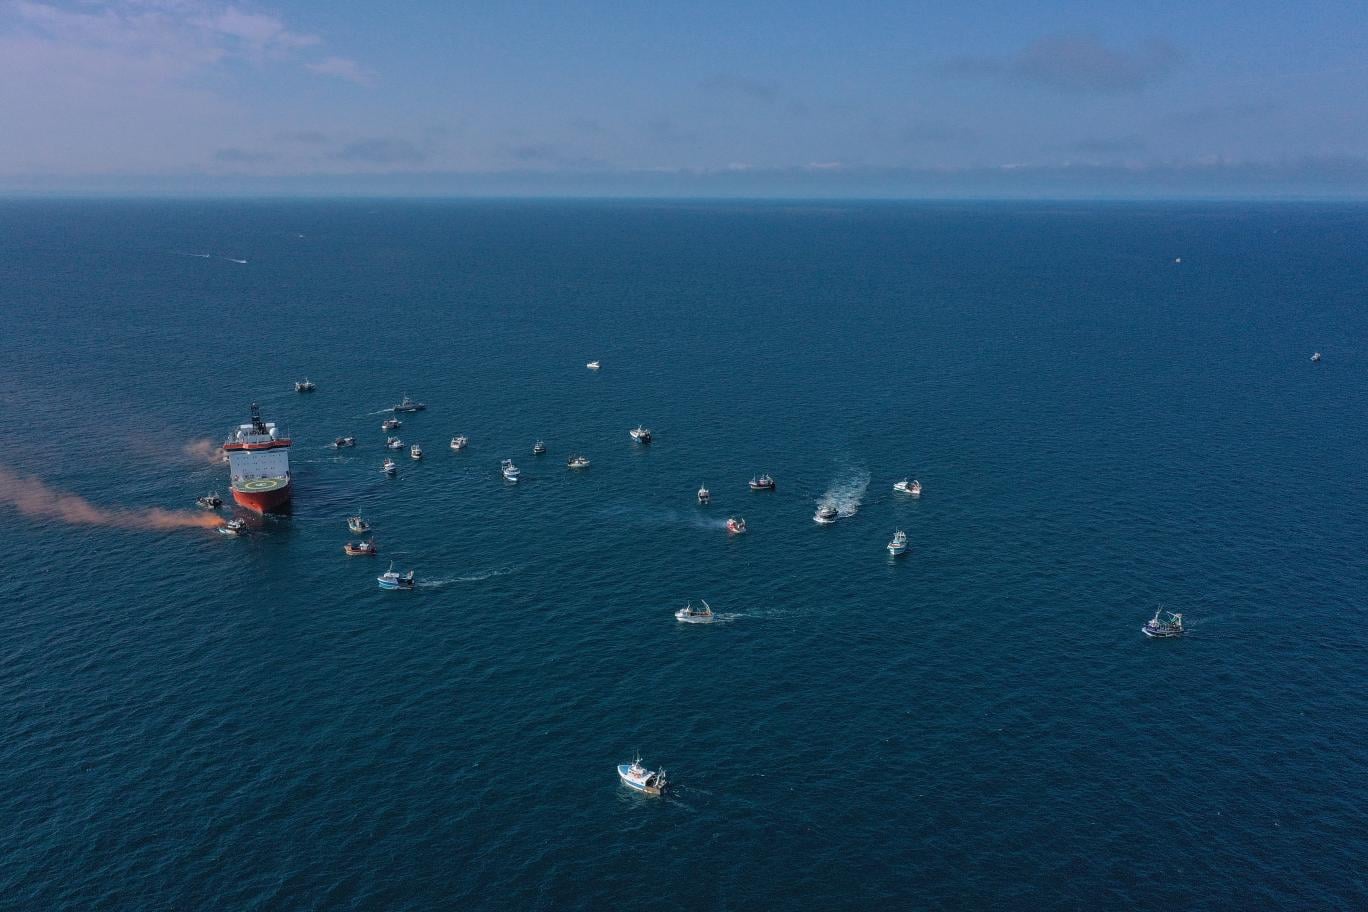 Aethra surrounded by French fishing boats at Saint-Brieuc offshore wind farm